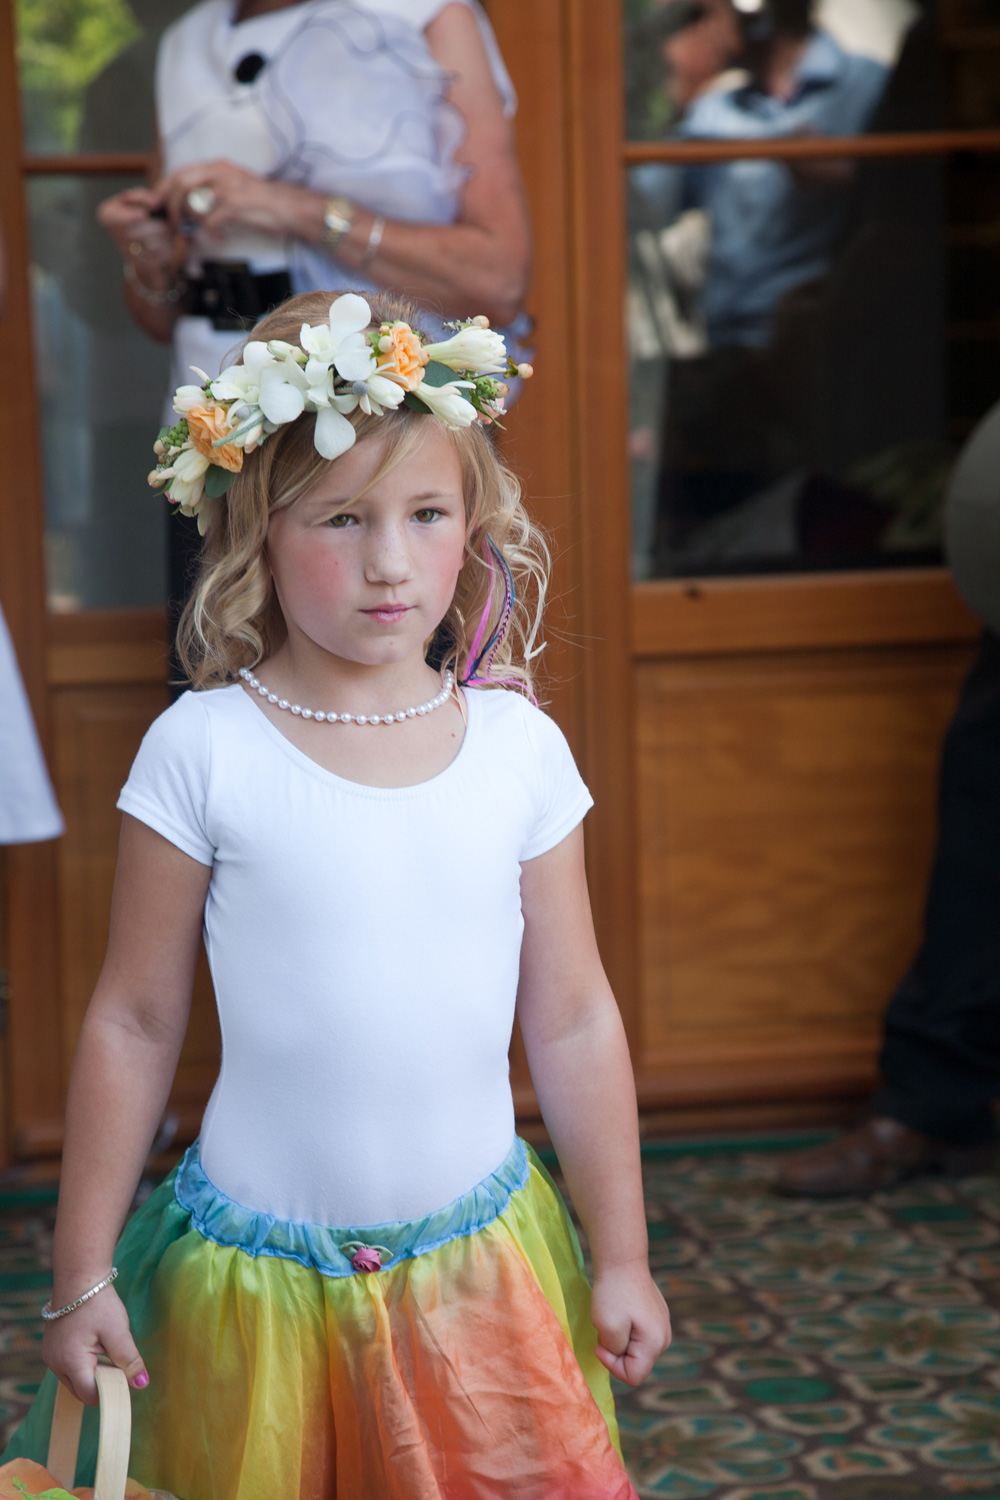 The flower girl prepares to walk down the aisle